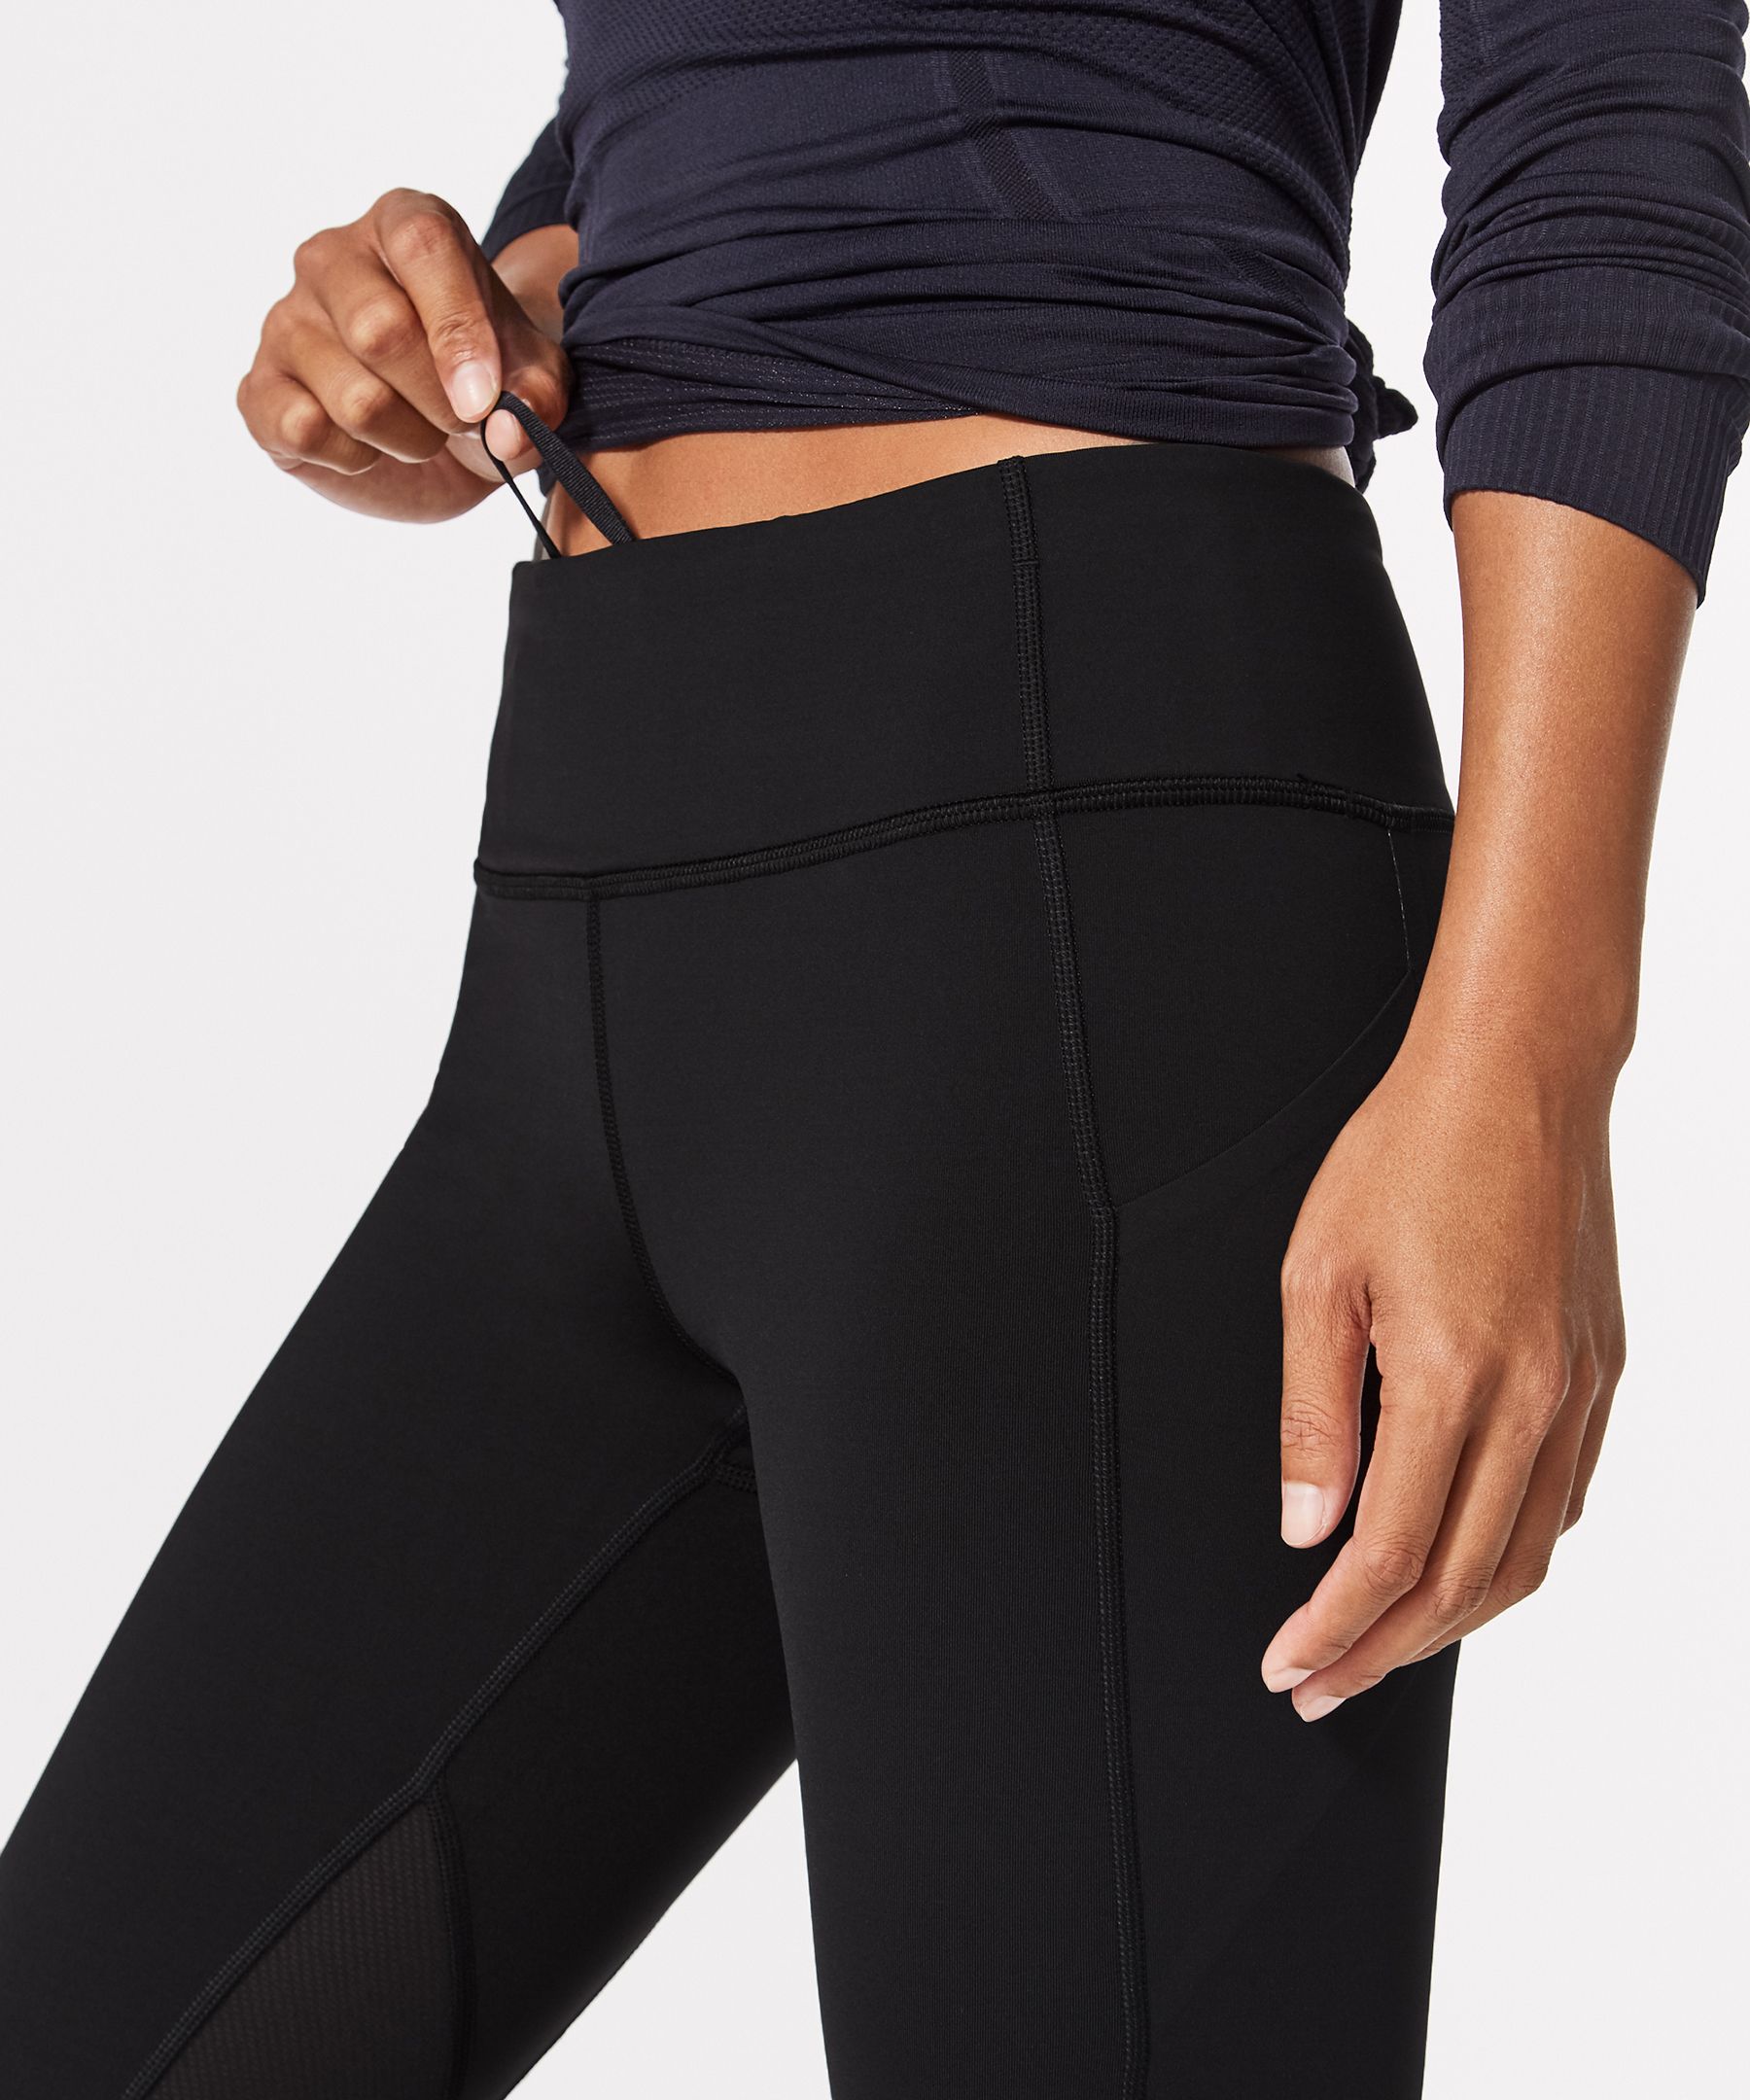 Lululemon Pace Rival Crop *22 in Black Size 6 - $44 (51% Off Retail) -  From Megan